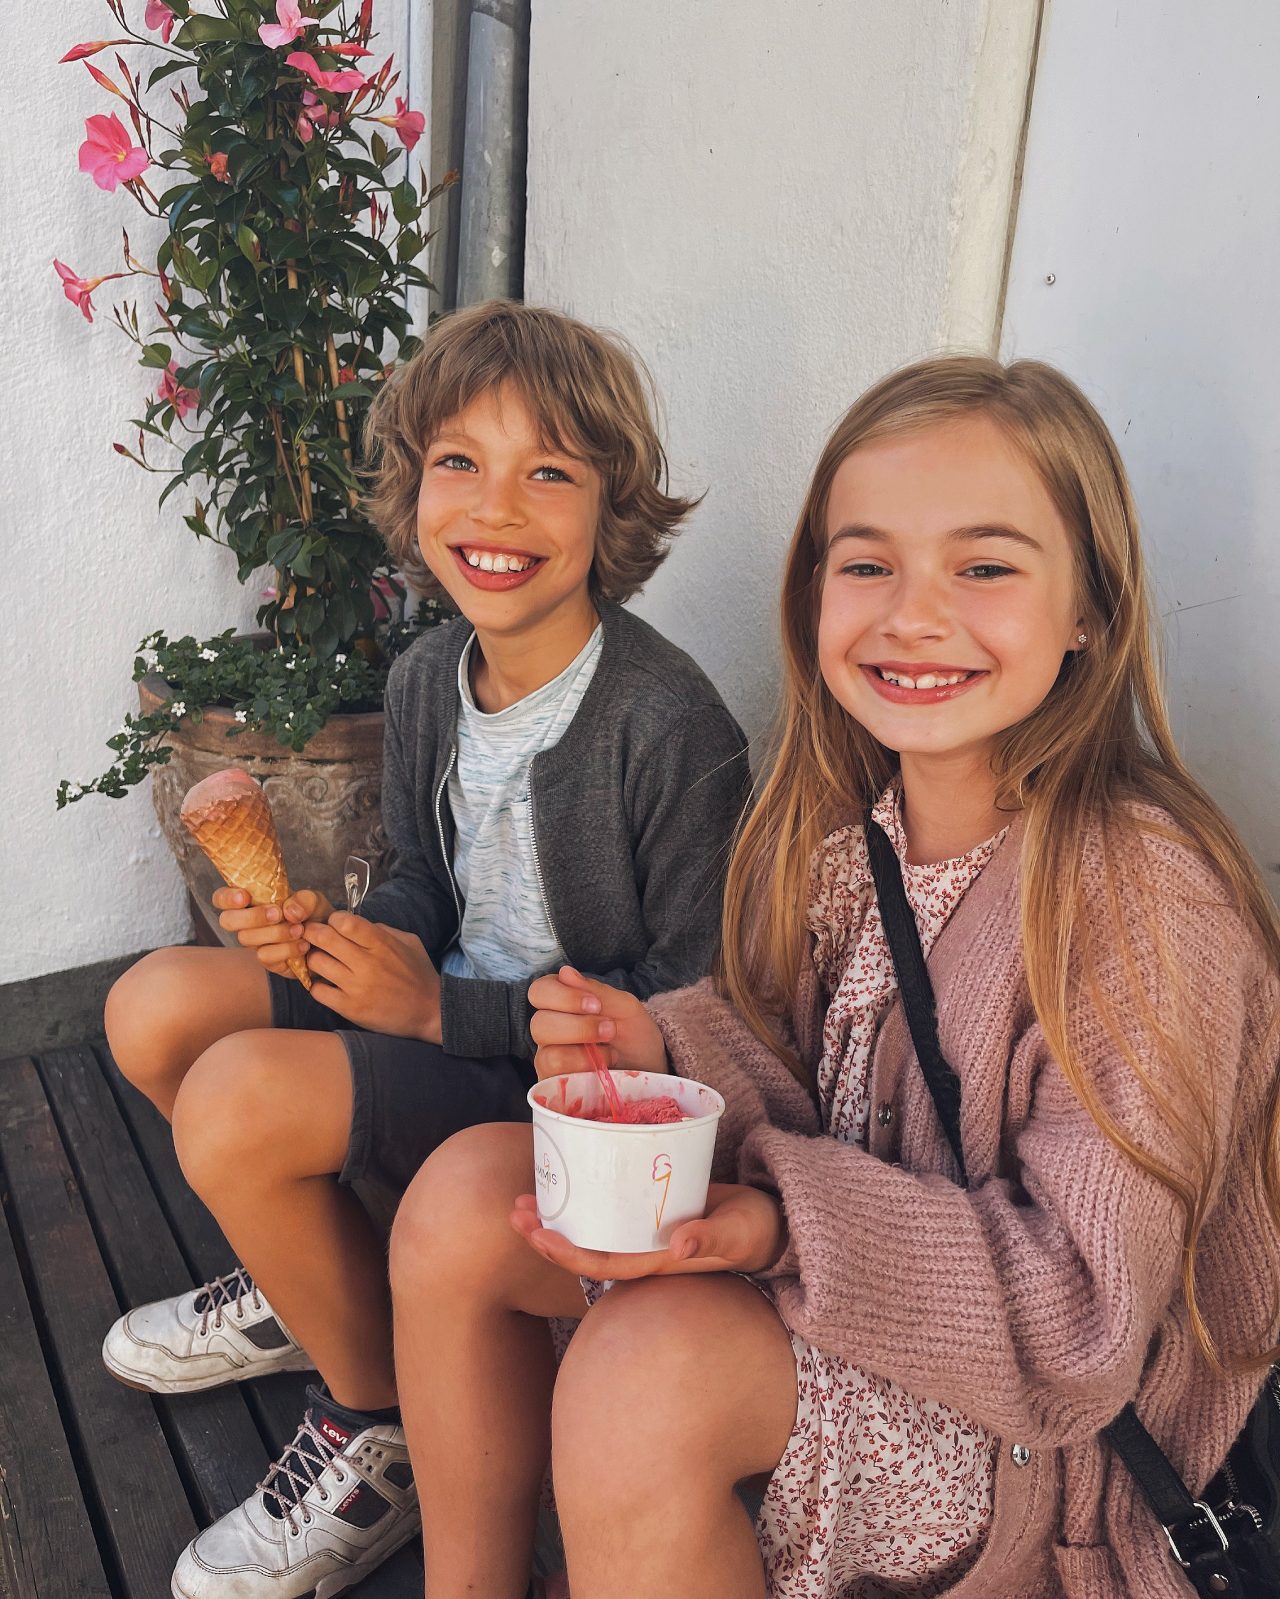 boy and girl eating icecream and smiling